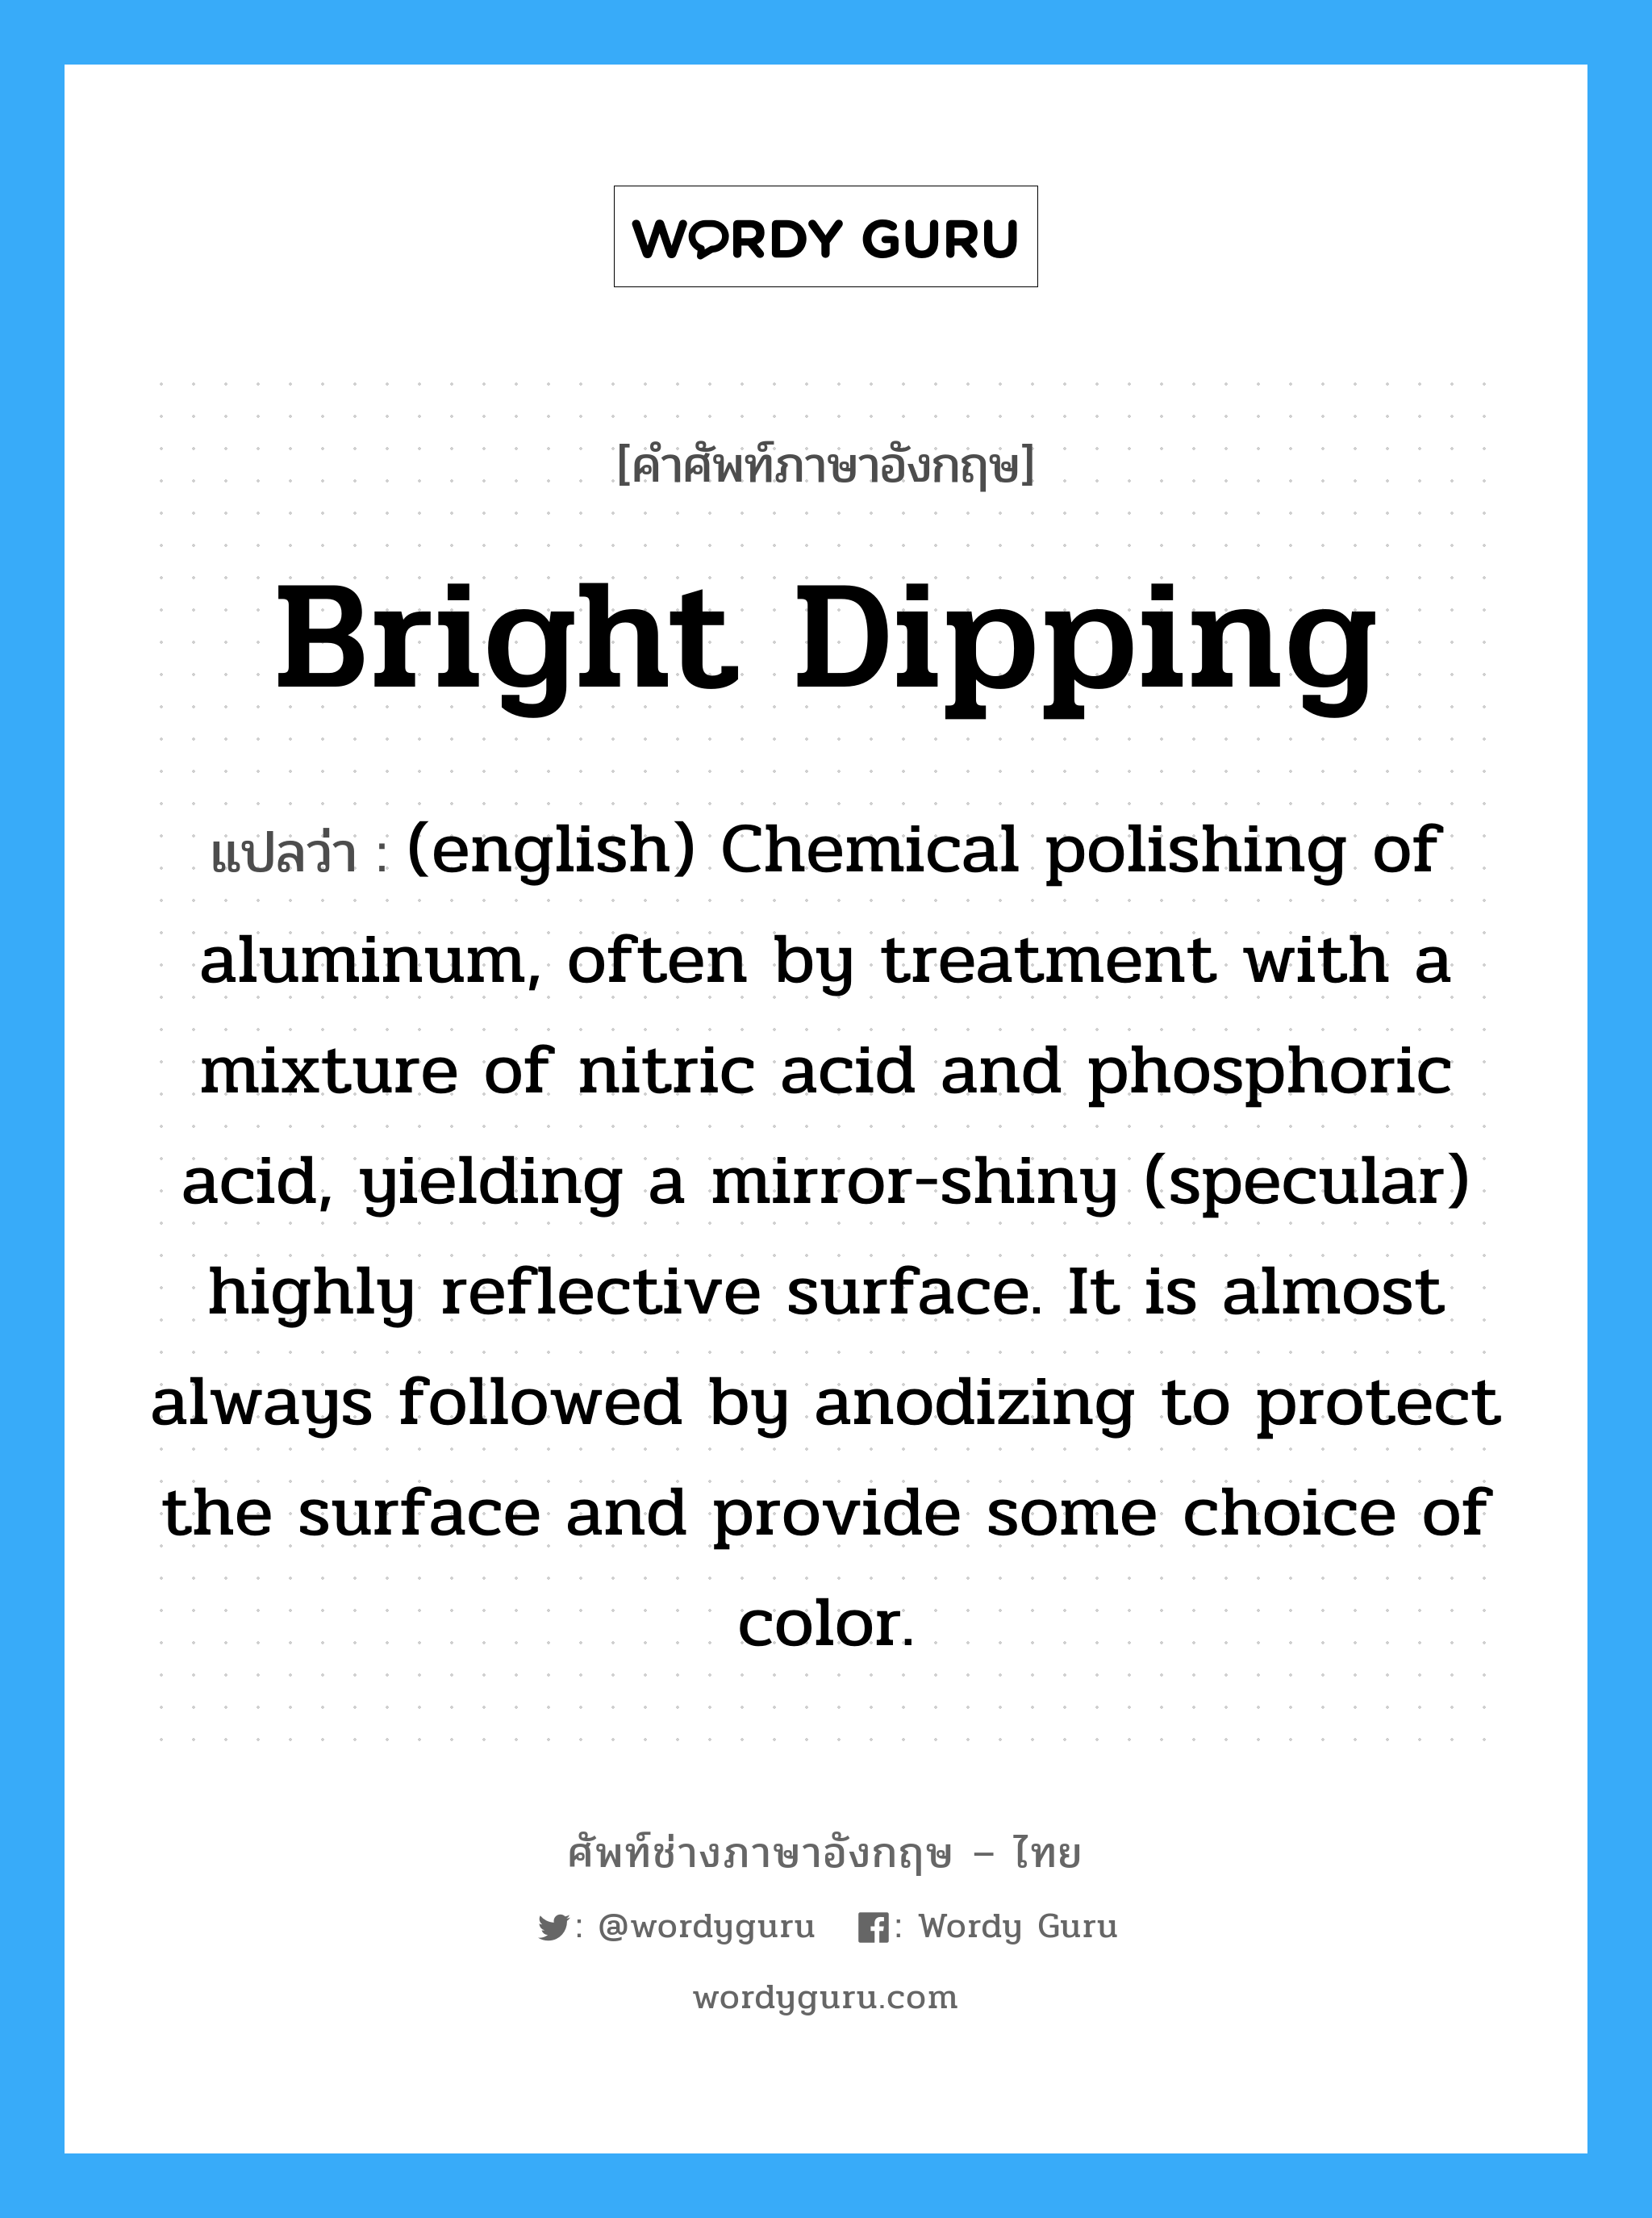 (english) Chemical polishing of aluminum, often by treatment with a mixture of nitric acid and phosphoric acid, yielding a mirror-shiny (specular) highly reflective surface. It is almost always followed by anodizing to protect the surface and provide some choice of color. ภาษาอังกฤษ?, คำศัพท์ช่างภาษาอังกฤษ - ไทย (english) Chemical polishing of aluminum, often by treatment with a mixture of nitric acid and phosphoric acid, yielding a mirror-shiny (specular) highly reflective surface. It is almost always followed by anodizing to protect the surface and provide some choice of color. คำศัพท์ภาษาอังกฤษ (english) Chemical polishing of aluminum, often by treatment with a mixture of nitric acid and phosphoric acid, yielding a mirror-shiny (specular) highly reflective surface. It is almost always followed by anodizing to protect the surface and provide some choice of color. แปลว่า Bright Dipping